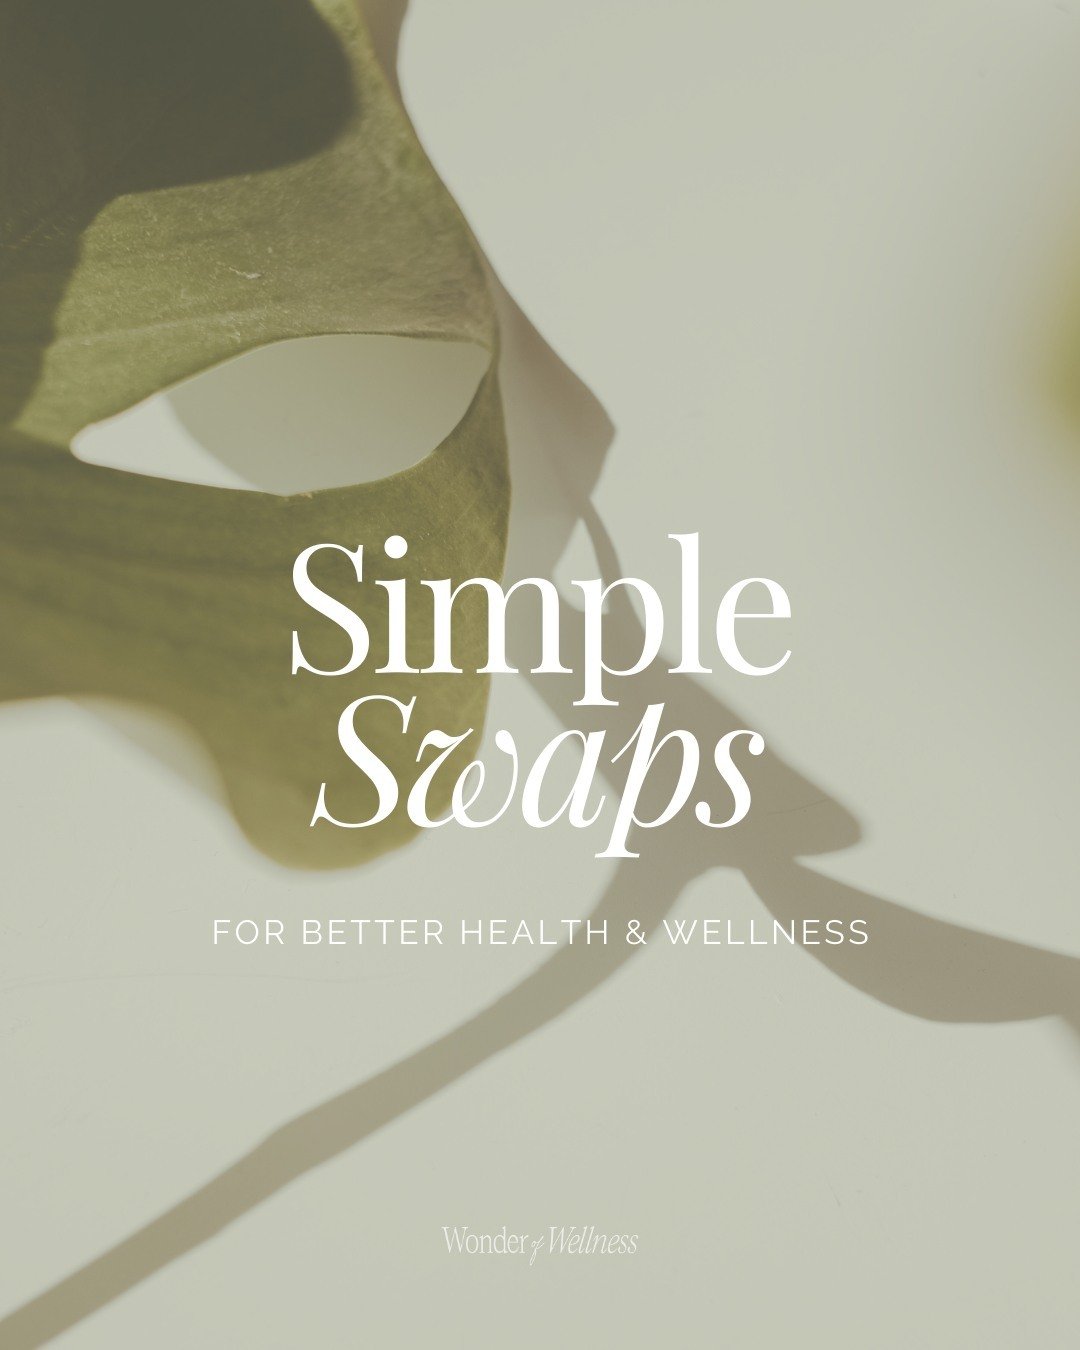 Welcome to our brand new series - Simple Swaps 👋🏼

This series is centred around how we can so easily swap certain things out to make room for healthier, better options to achieve optimum wellness and calmness.

We're kicking off our series with ou